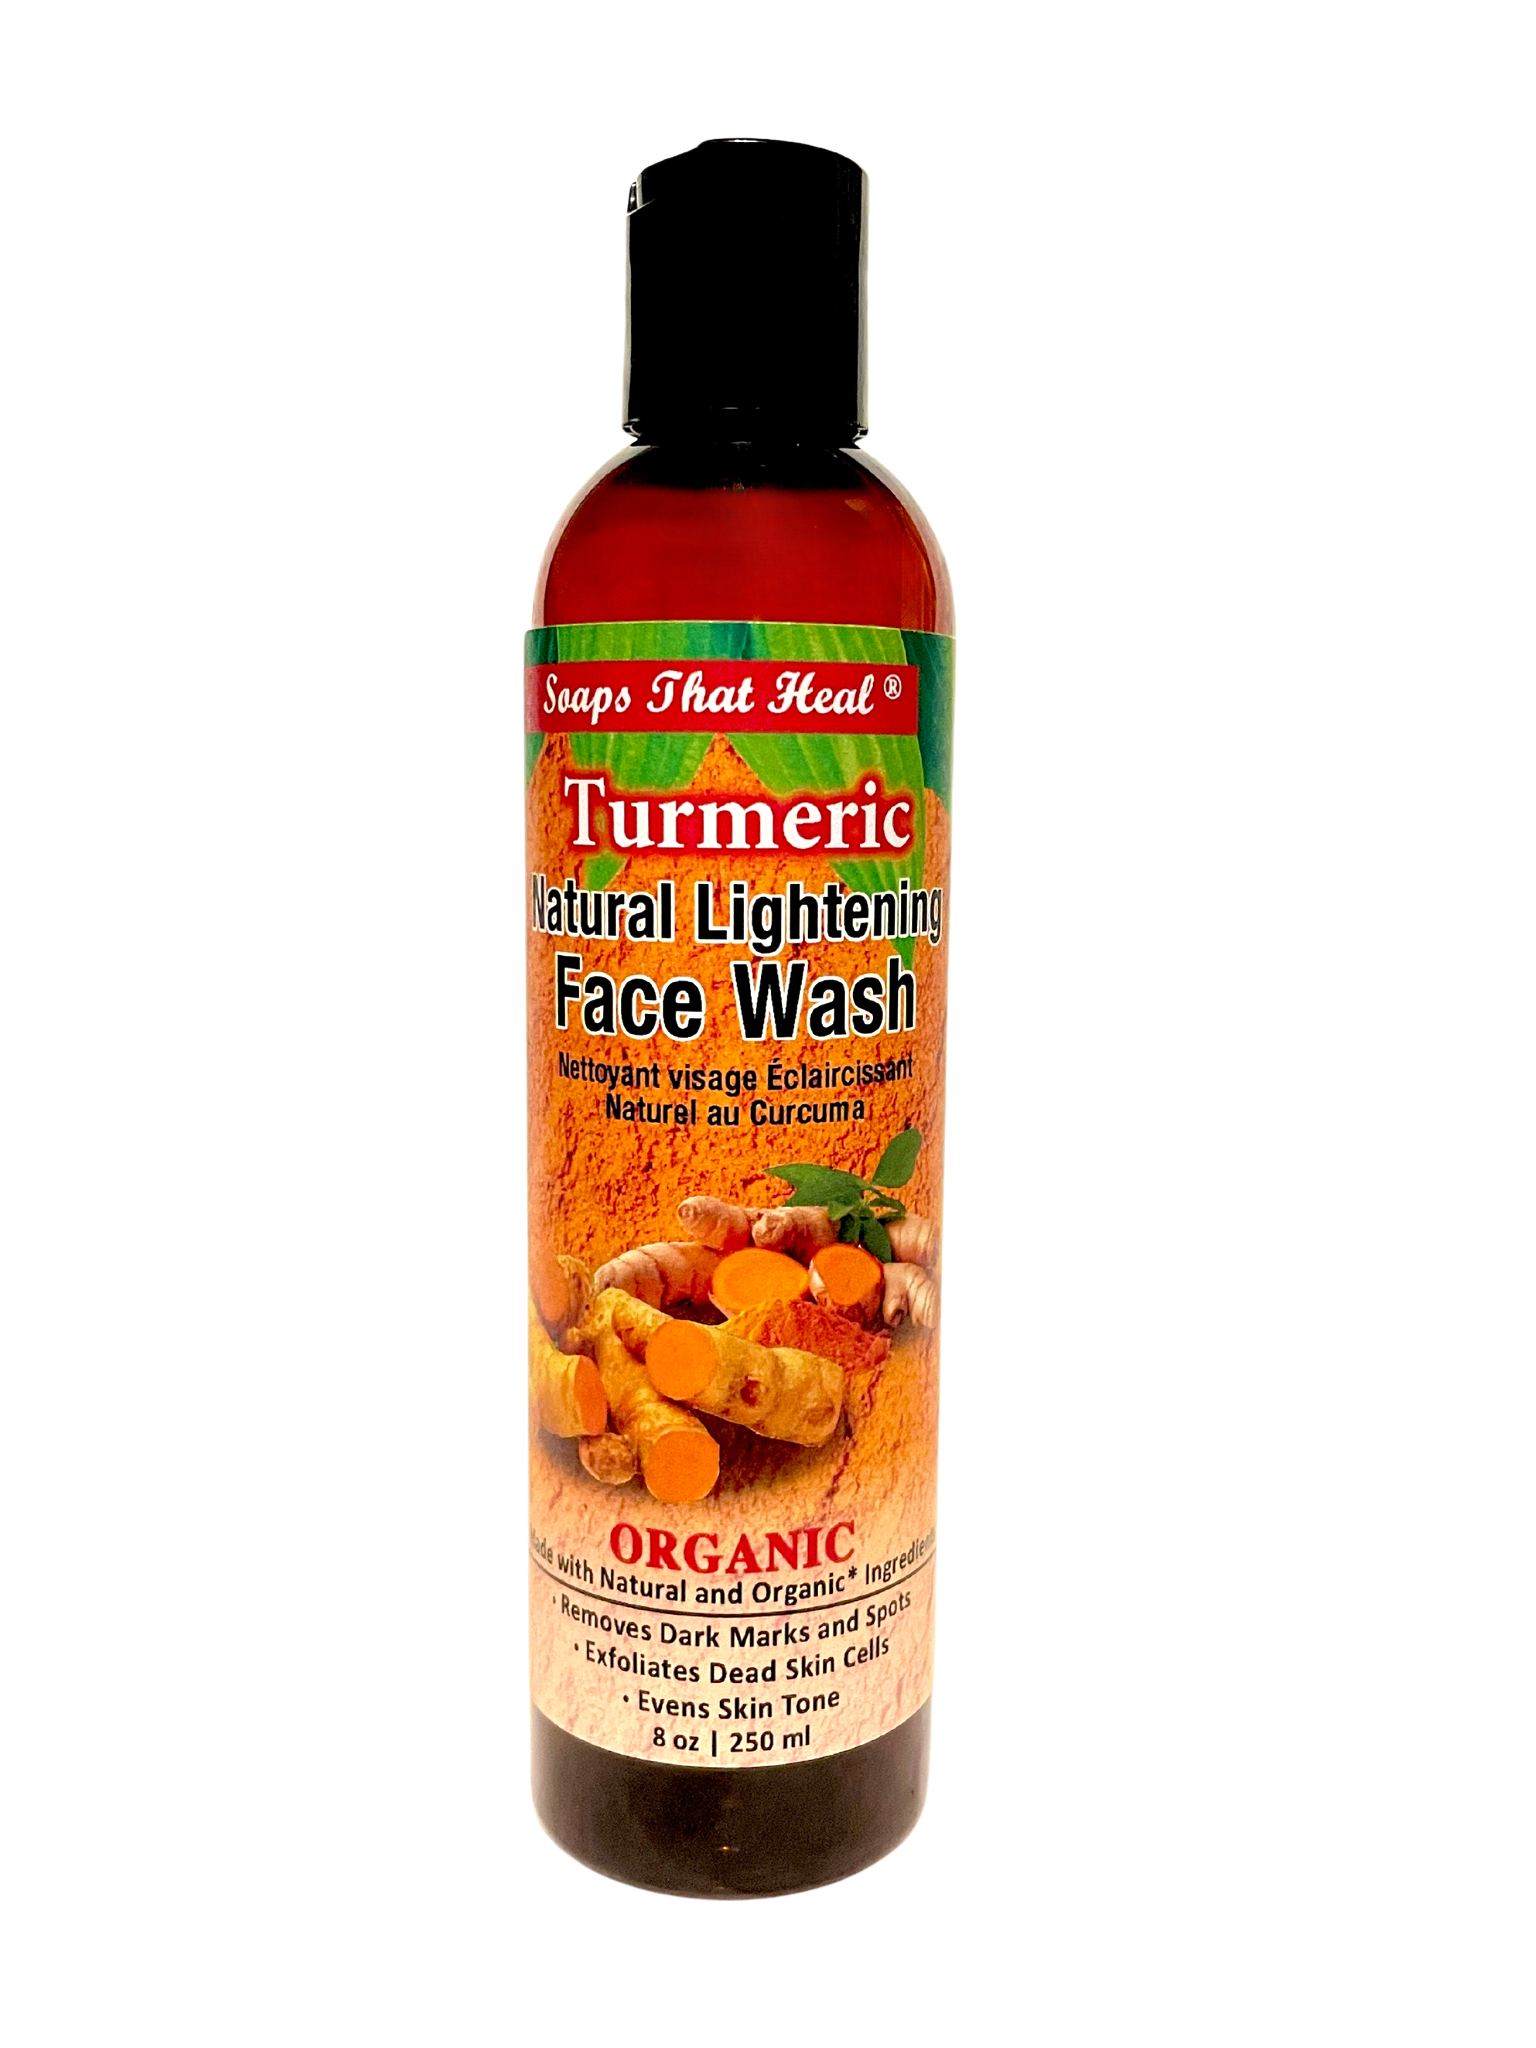 turmeric natural lightening face wash, soaps that heal turmeric soap, natural lightening, natural alternatives to whitening creams,fade creams,bleaching creams,Remove Dark Spots and Acne,aspen kay,Healthy Skin, Natural Products Skin Care, problem skin,Turmeric Soap,the best body soap,saje,soaps that heal,healing soap, how to get rid of dark marks,dark spots,whitening soaps,lightening soaps,hyperpigmentation, best turmeric soap,oilblends,uncle benney's,soaps that heal